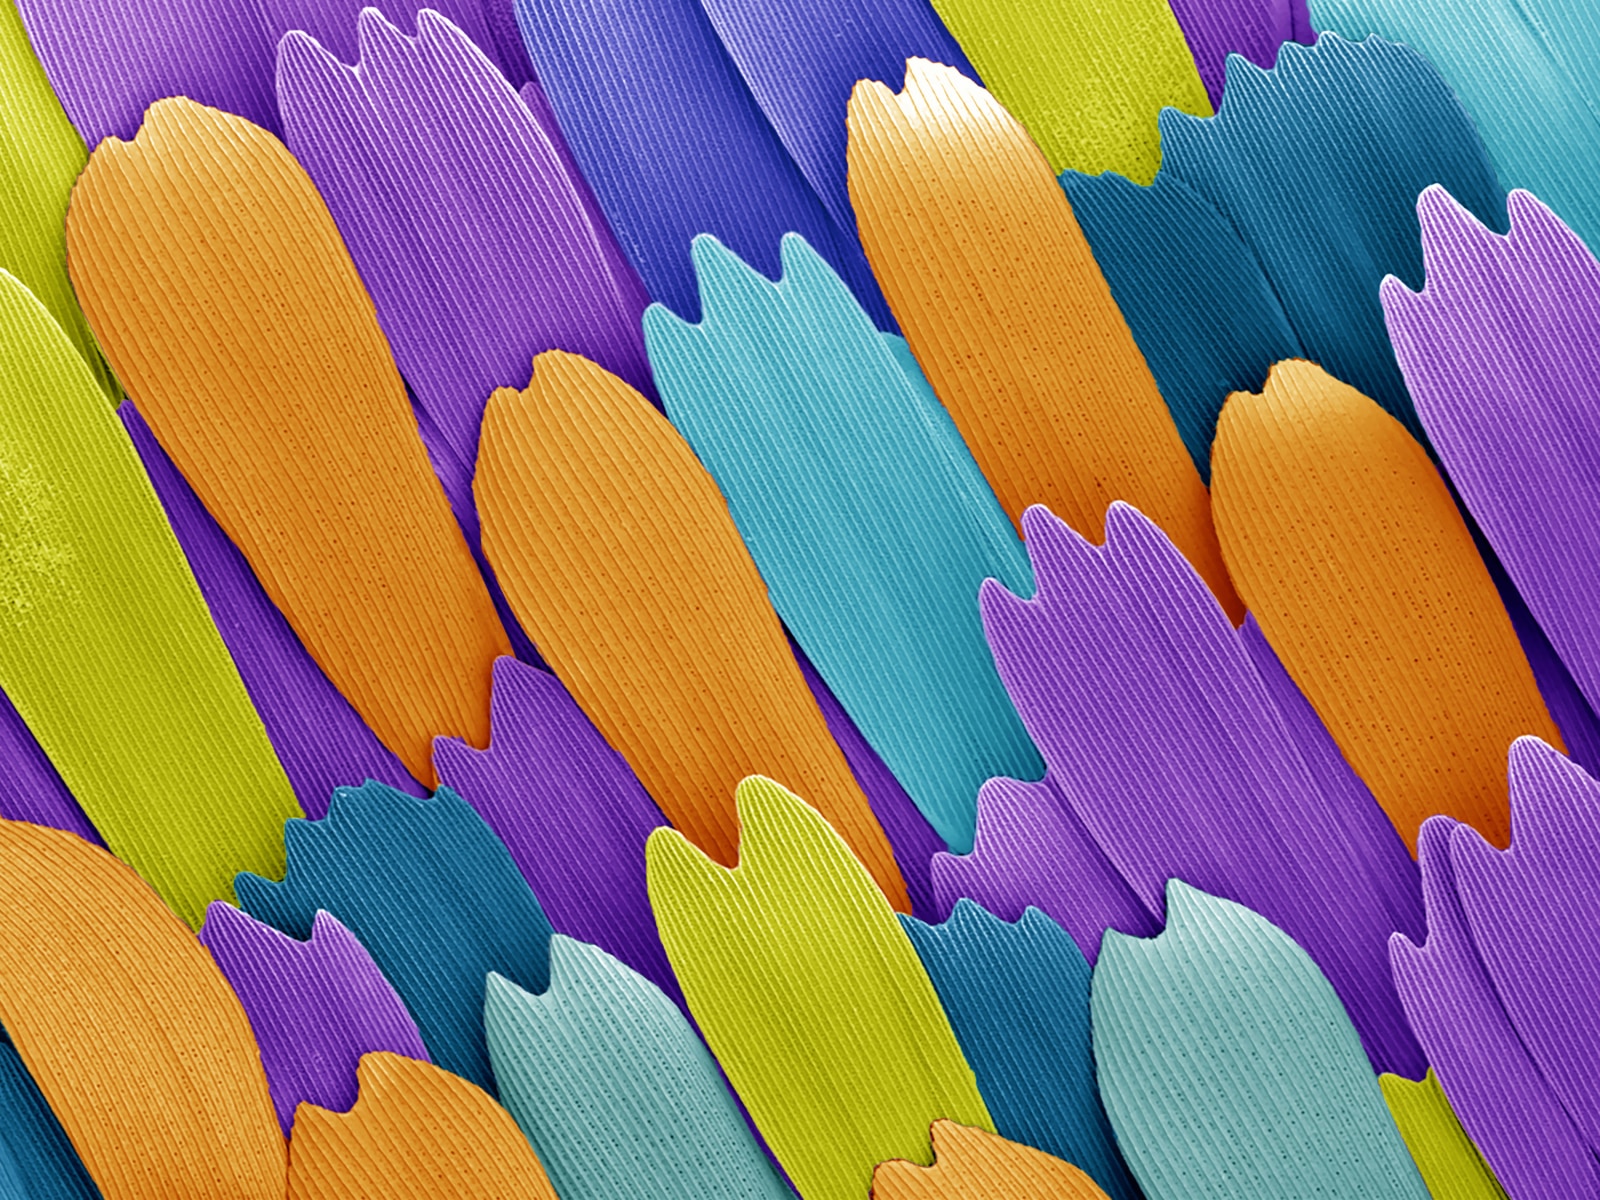 Butterfly Wing - Scales from the wing of a Laurel swallowtail butterfly Papilio palamedes (colorized SEM), Submitted by: Vijayasanka Ramen, University of Mississippi, Oxford, MS